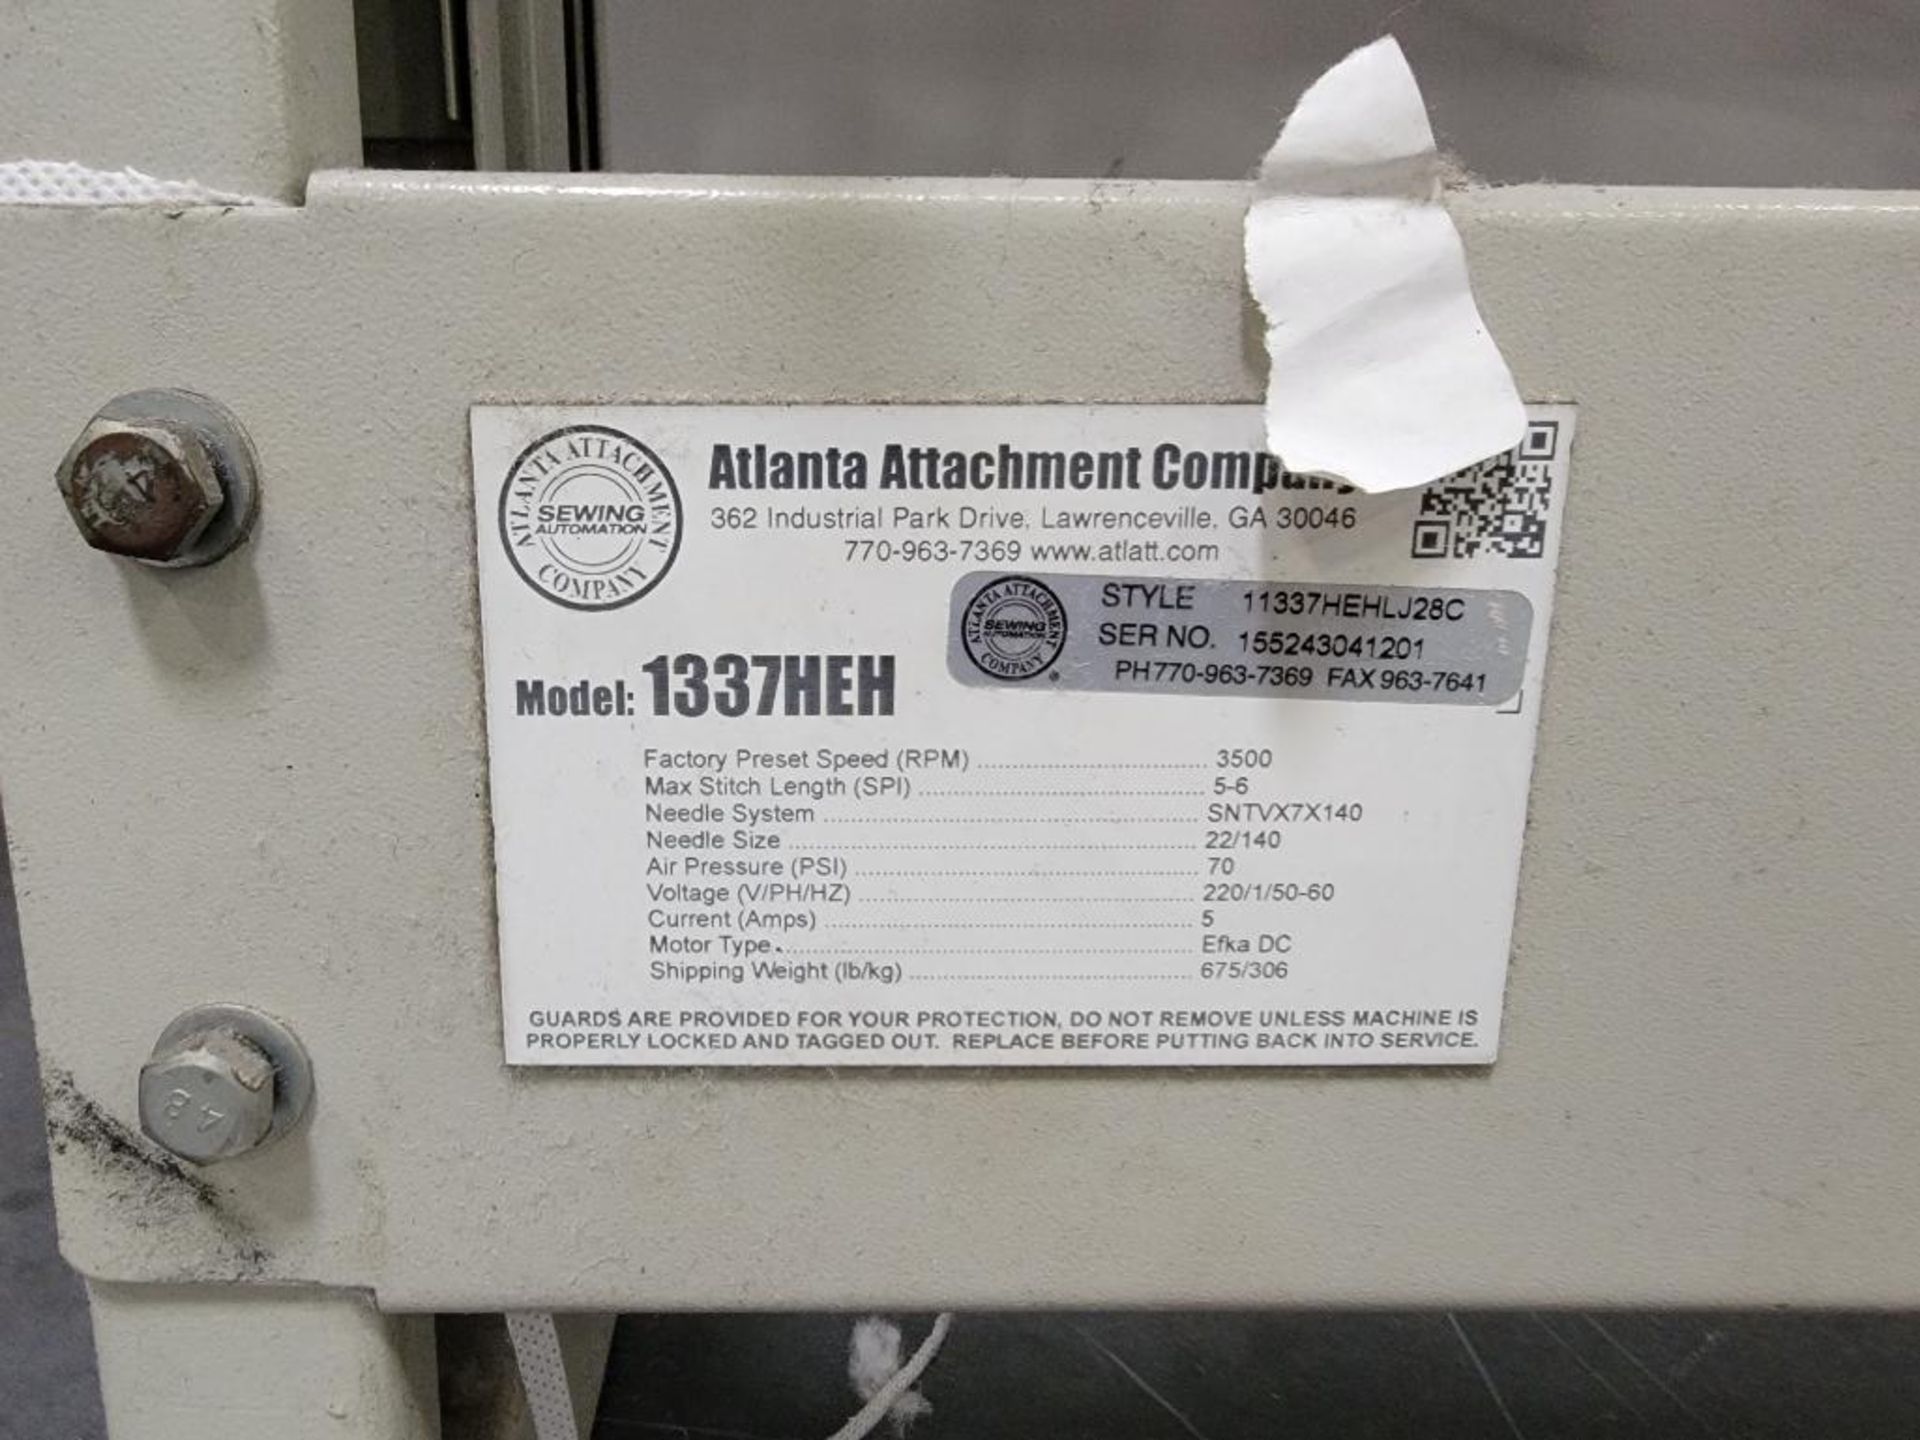 Atlanta Attachment Panel Flanger Sewing Machine Model 1337HEH, S/N 155243041201 [25074] with Table a - Image 4 of 5